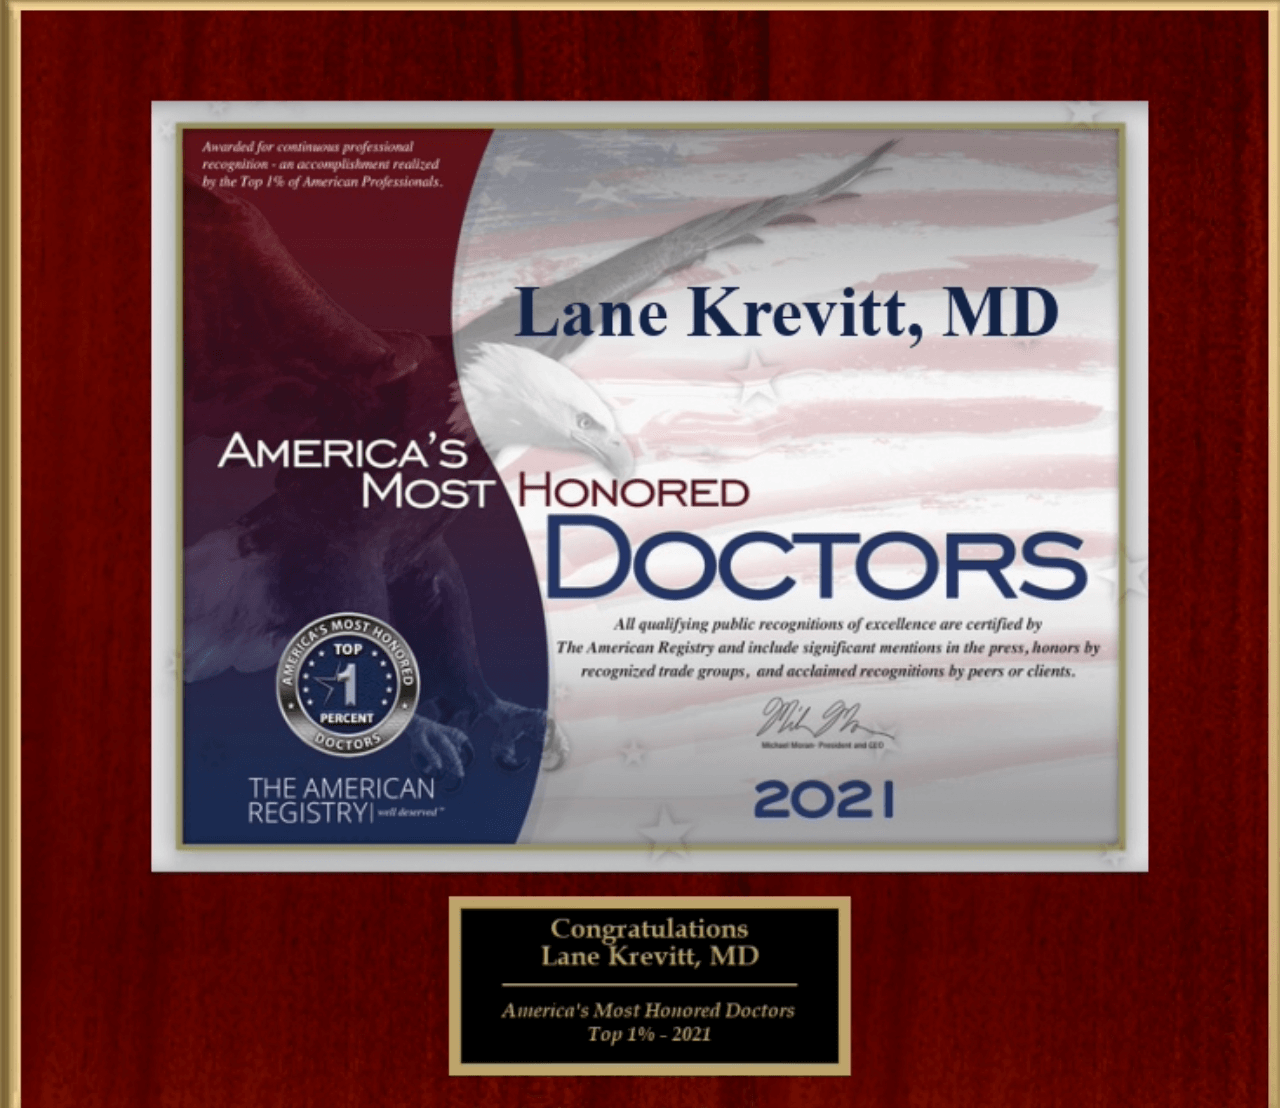 America's Most Honored Doctors 2021